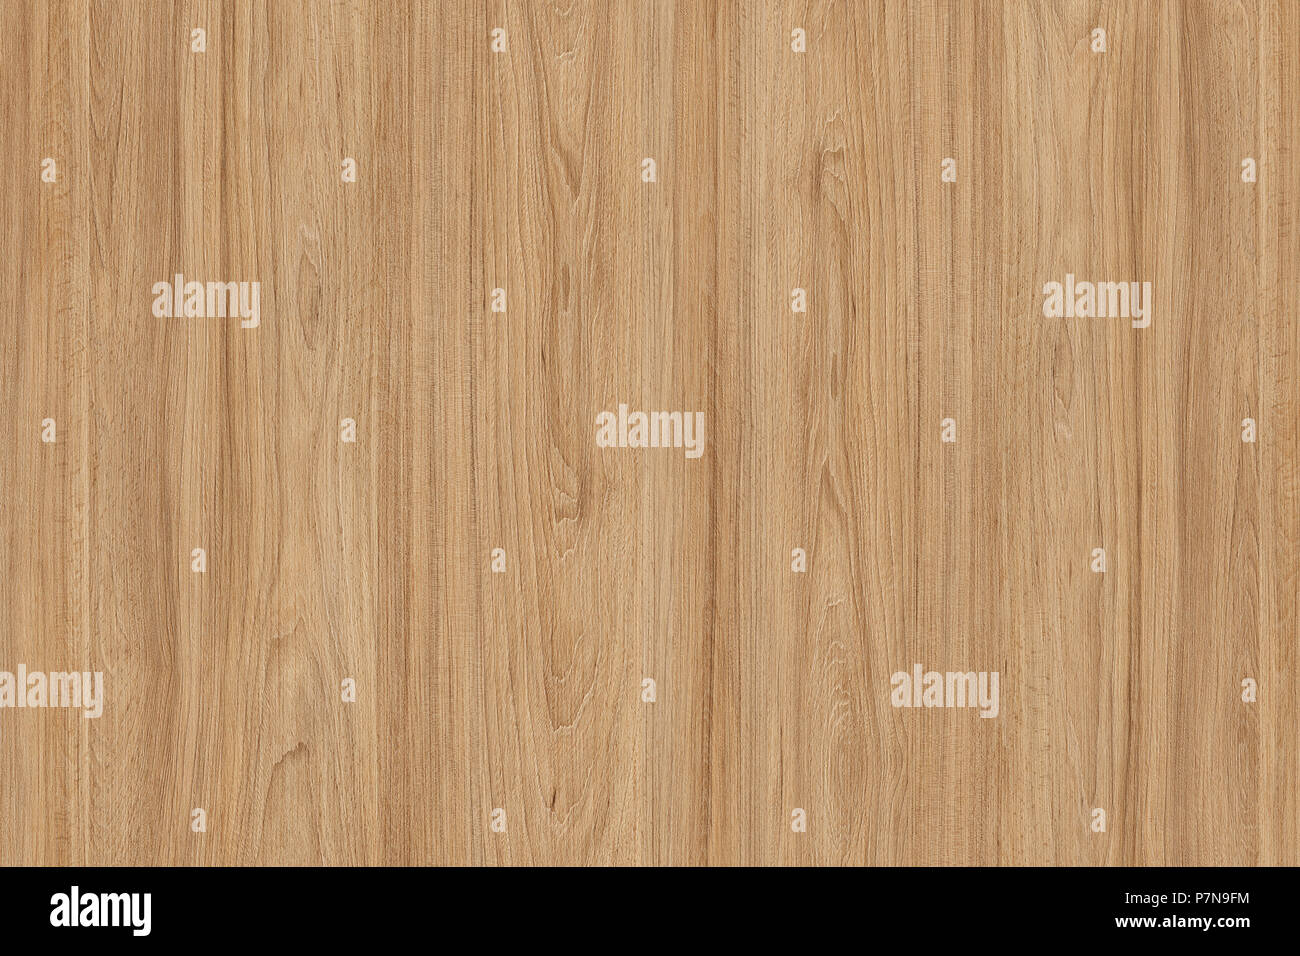 Brown grunge wood texture. Abstract rustic background Stock Photo